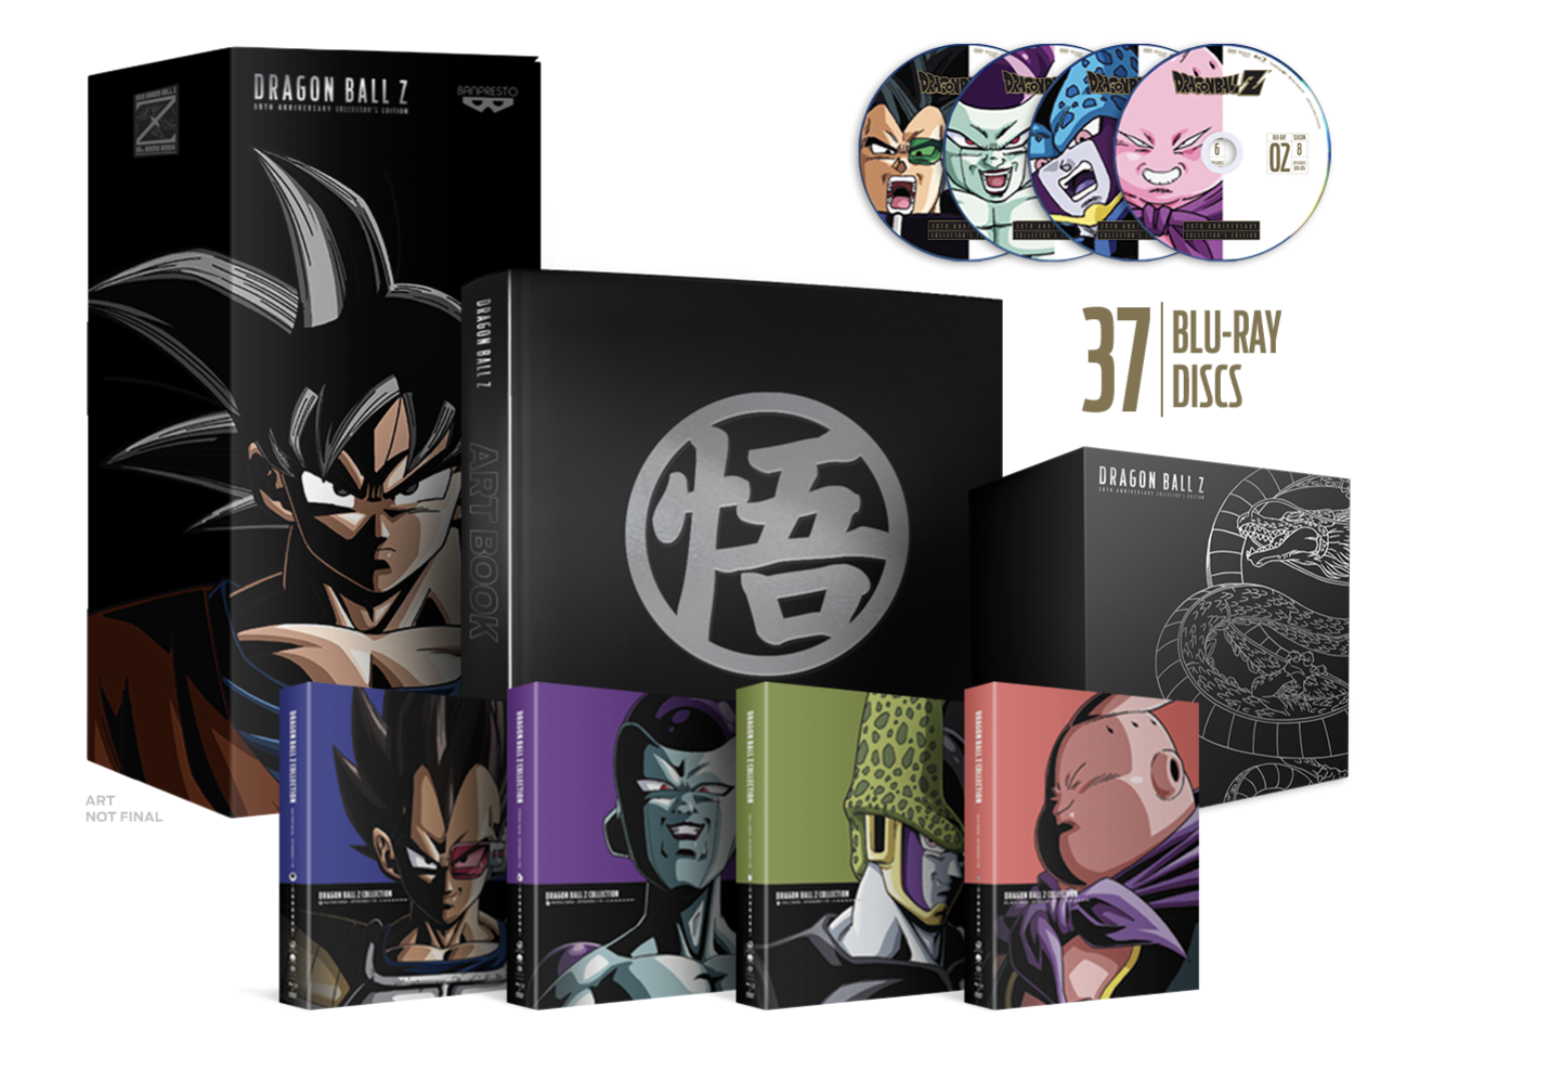 30TH ANNIVERSARY COLLECTOR’S EDITION OF DRAGON BALL Z NOW AVAILABLE TO PRE-ORDER!